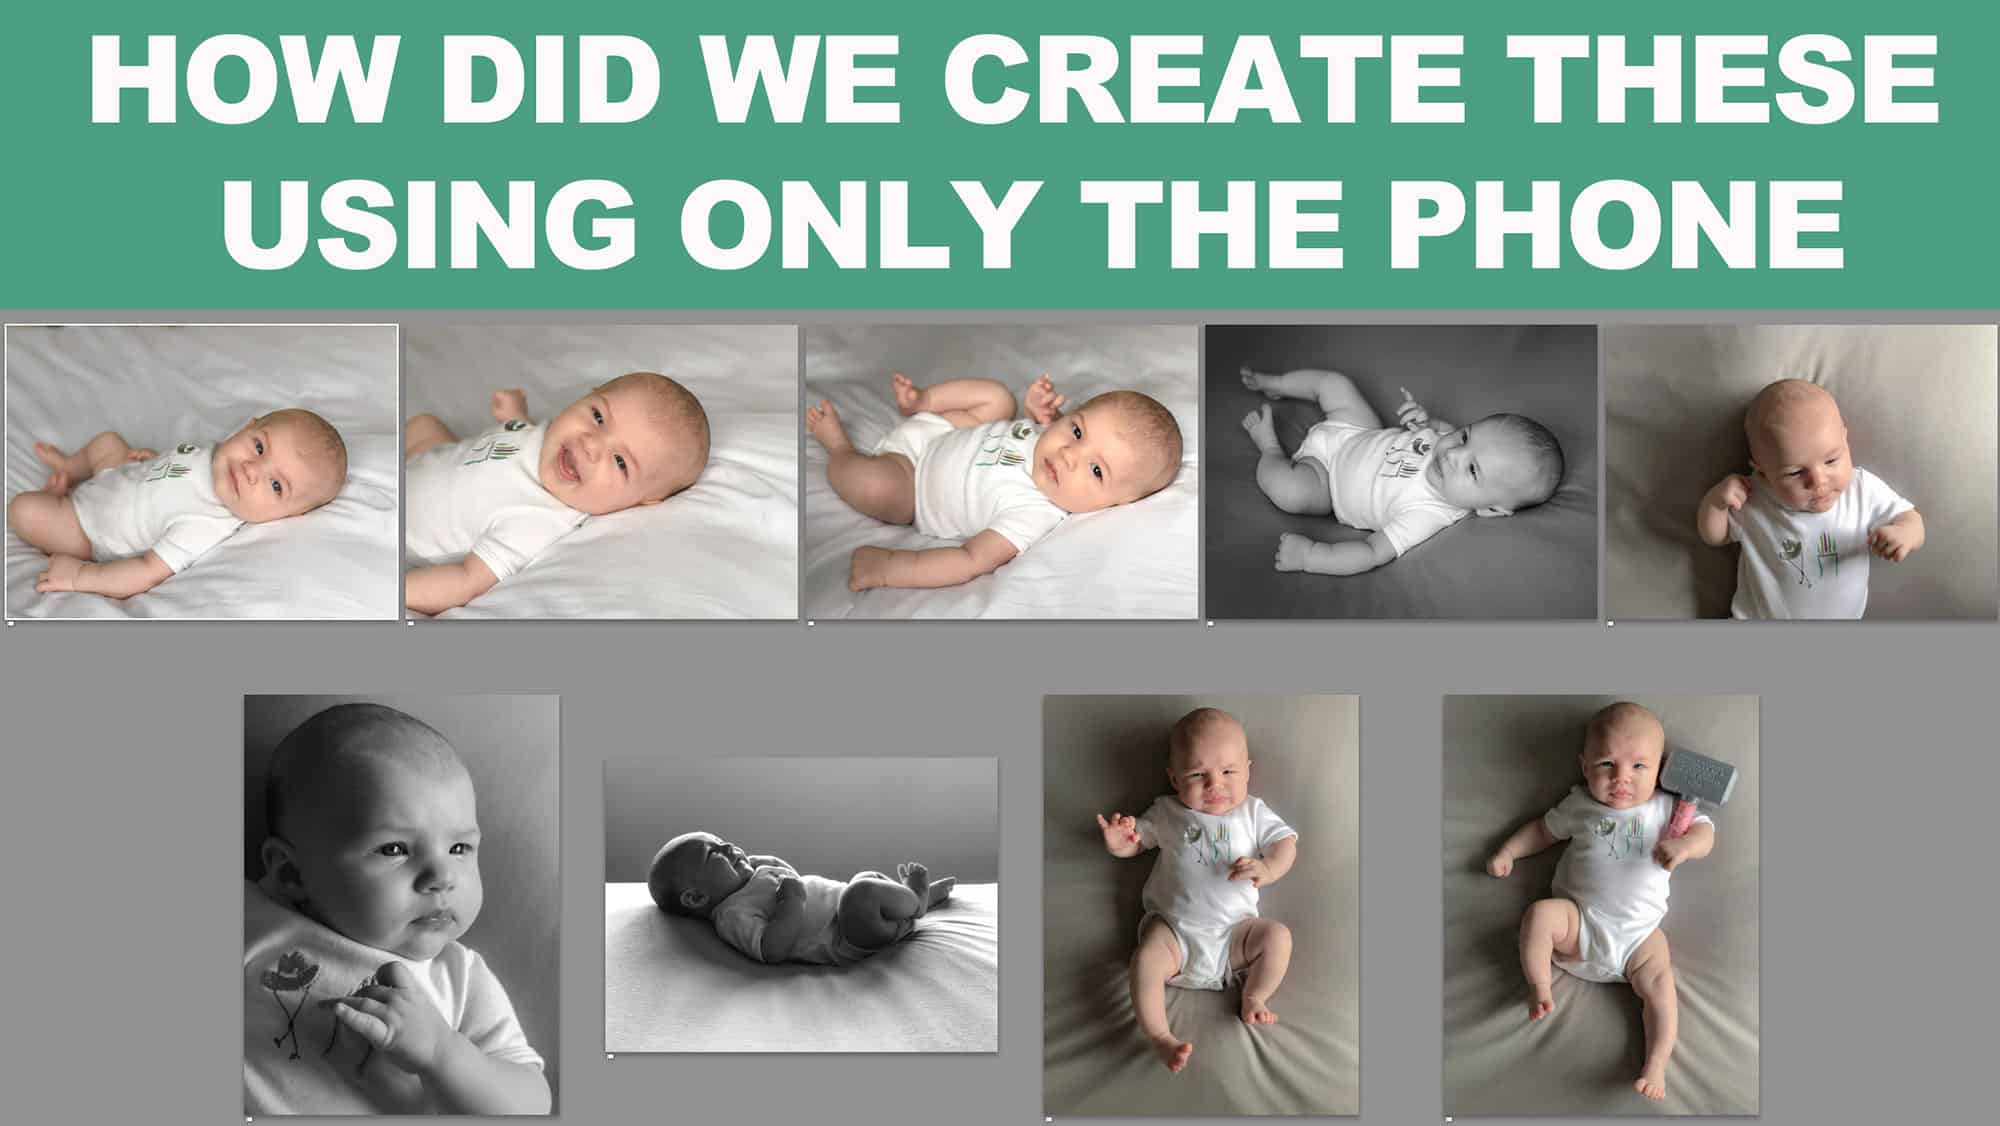 Take baby photos at home using only the phone diy project